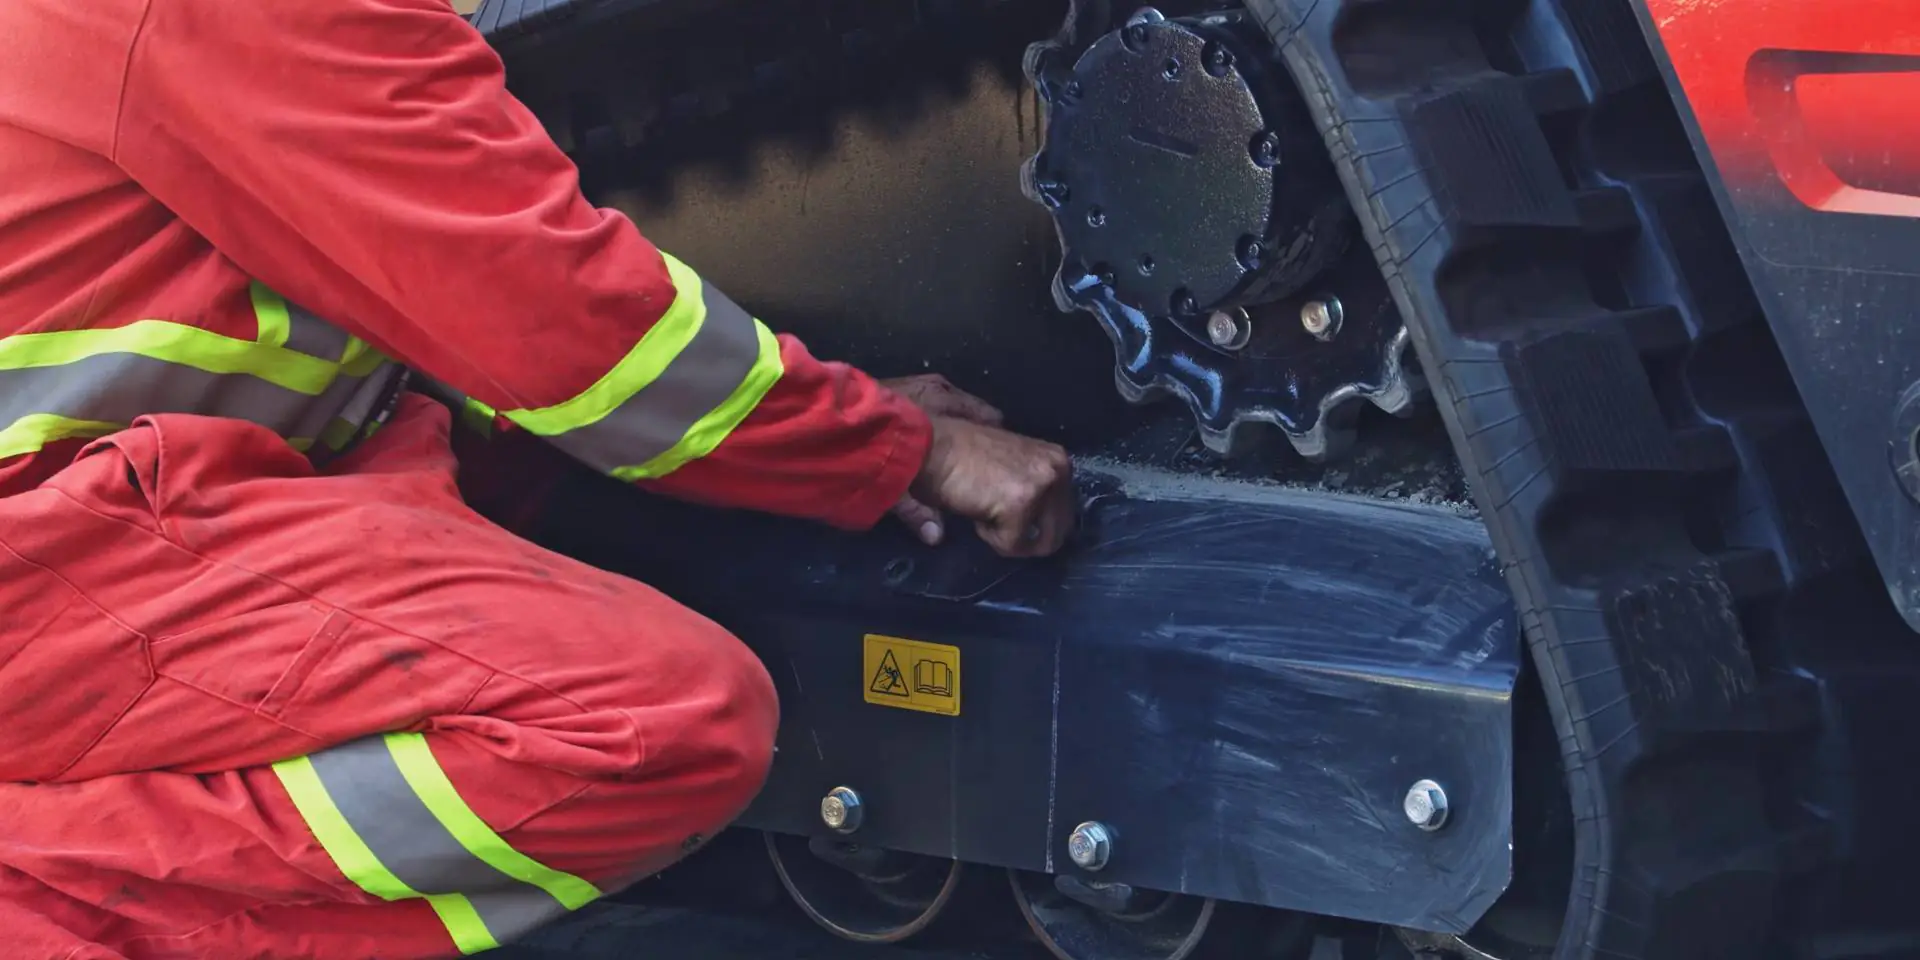 mechnic opens the grease valve on a compact track loader